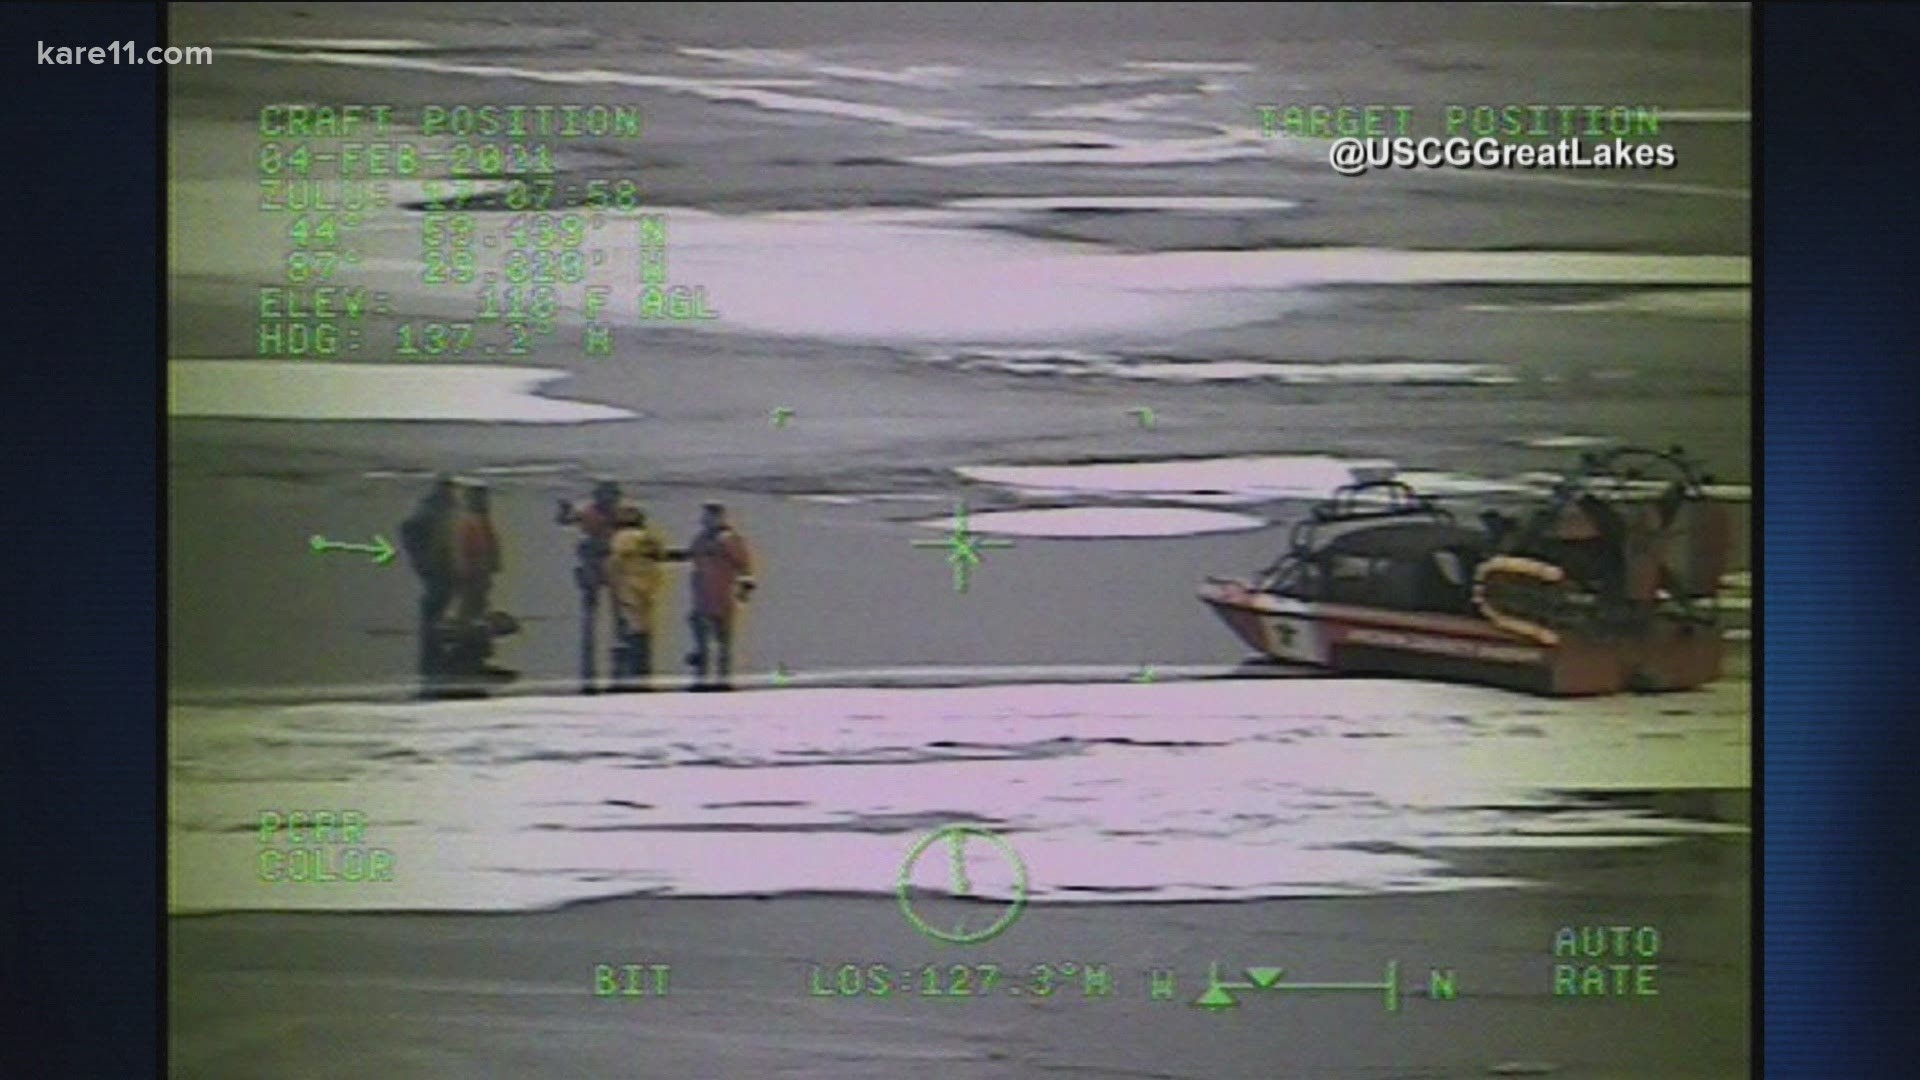 Numerous anglers had to be rescued when the ice they were on broke apart